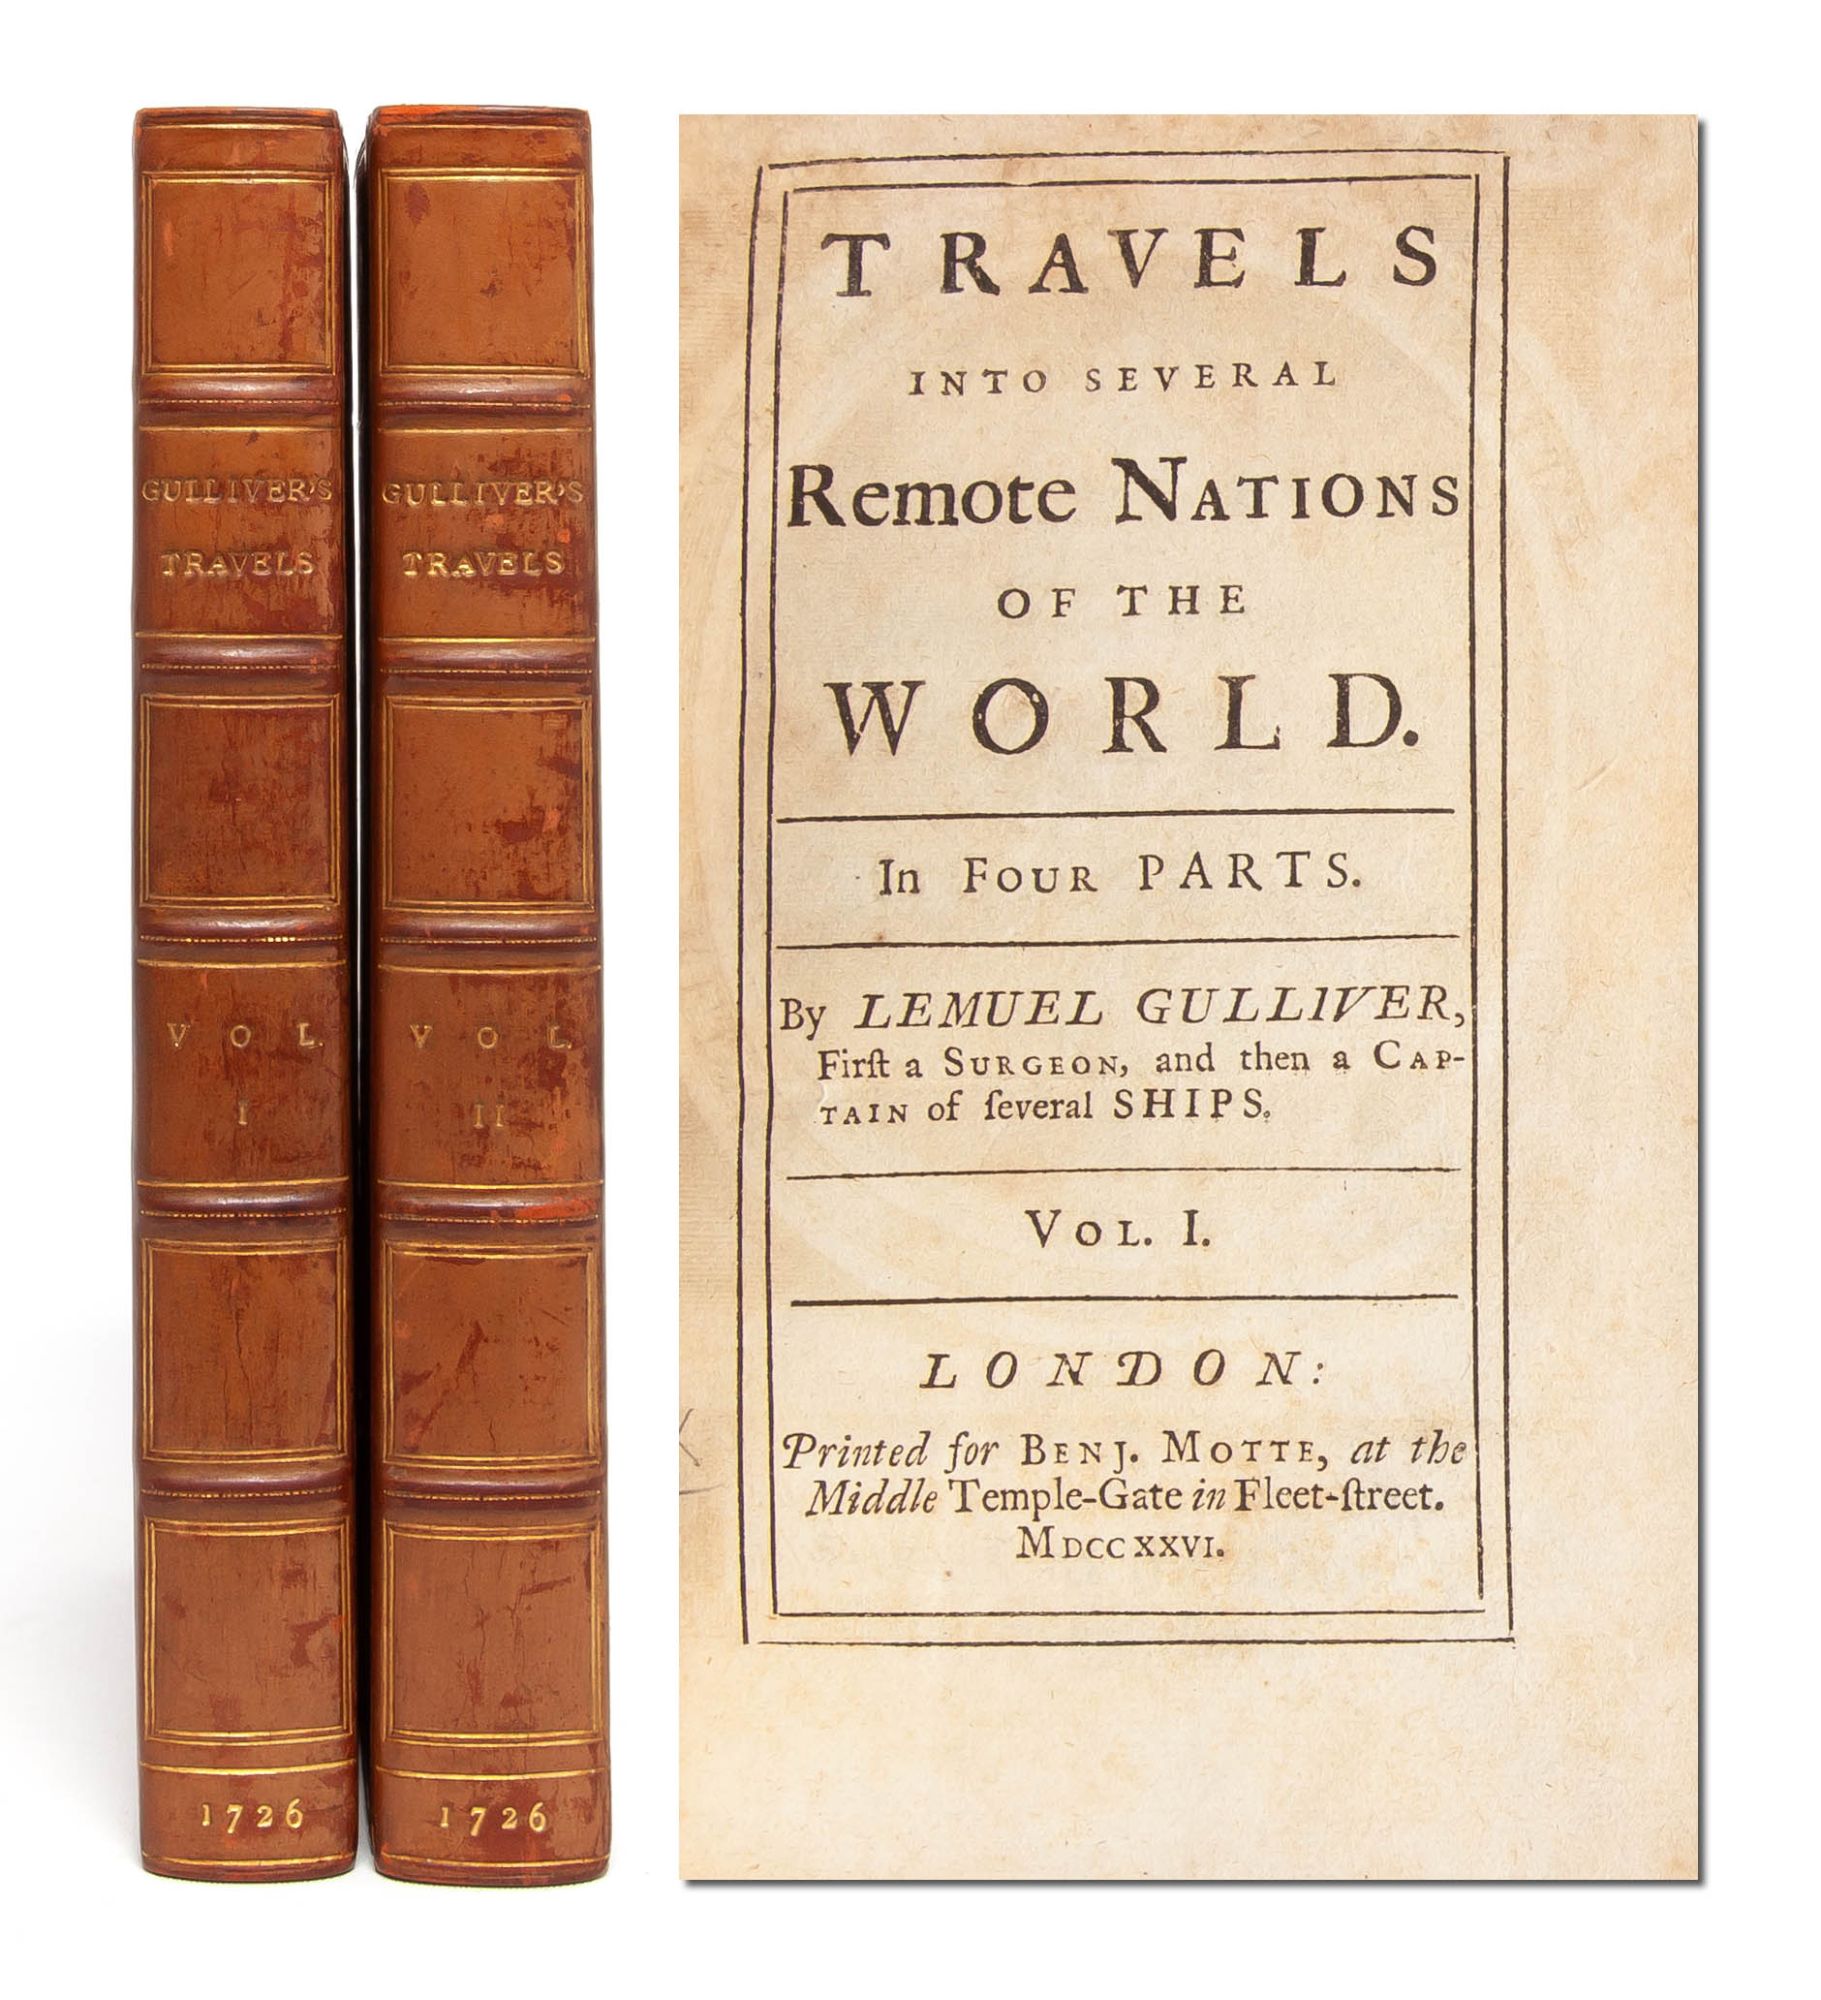 (Item #5544) Travels into Several Remote Nations of the World. In four parts. By Lemuel Gulliver, First a Surgeon and then a Captain of Several Ships. Jonathan Swift.